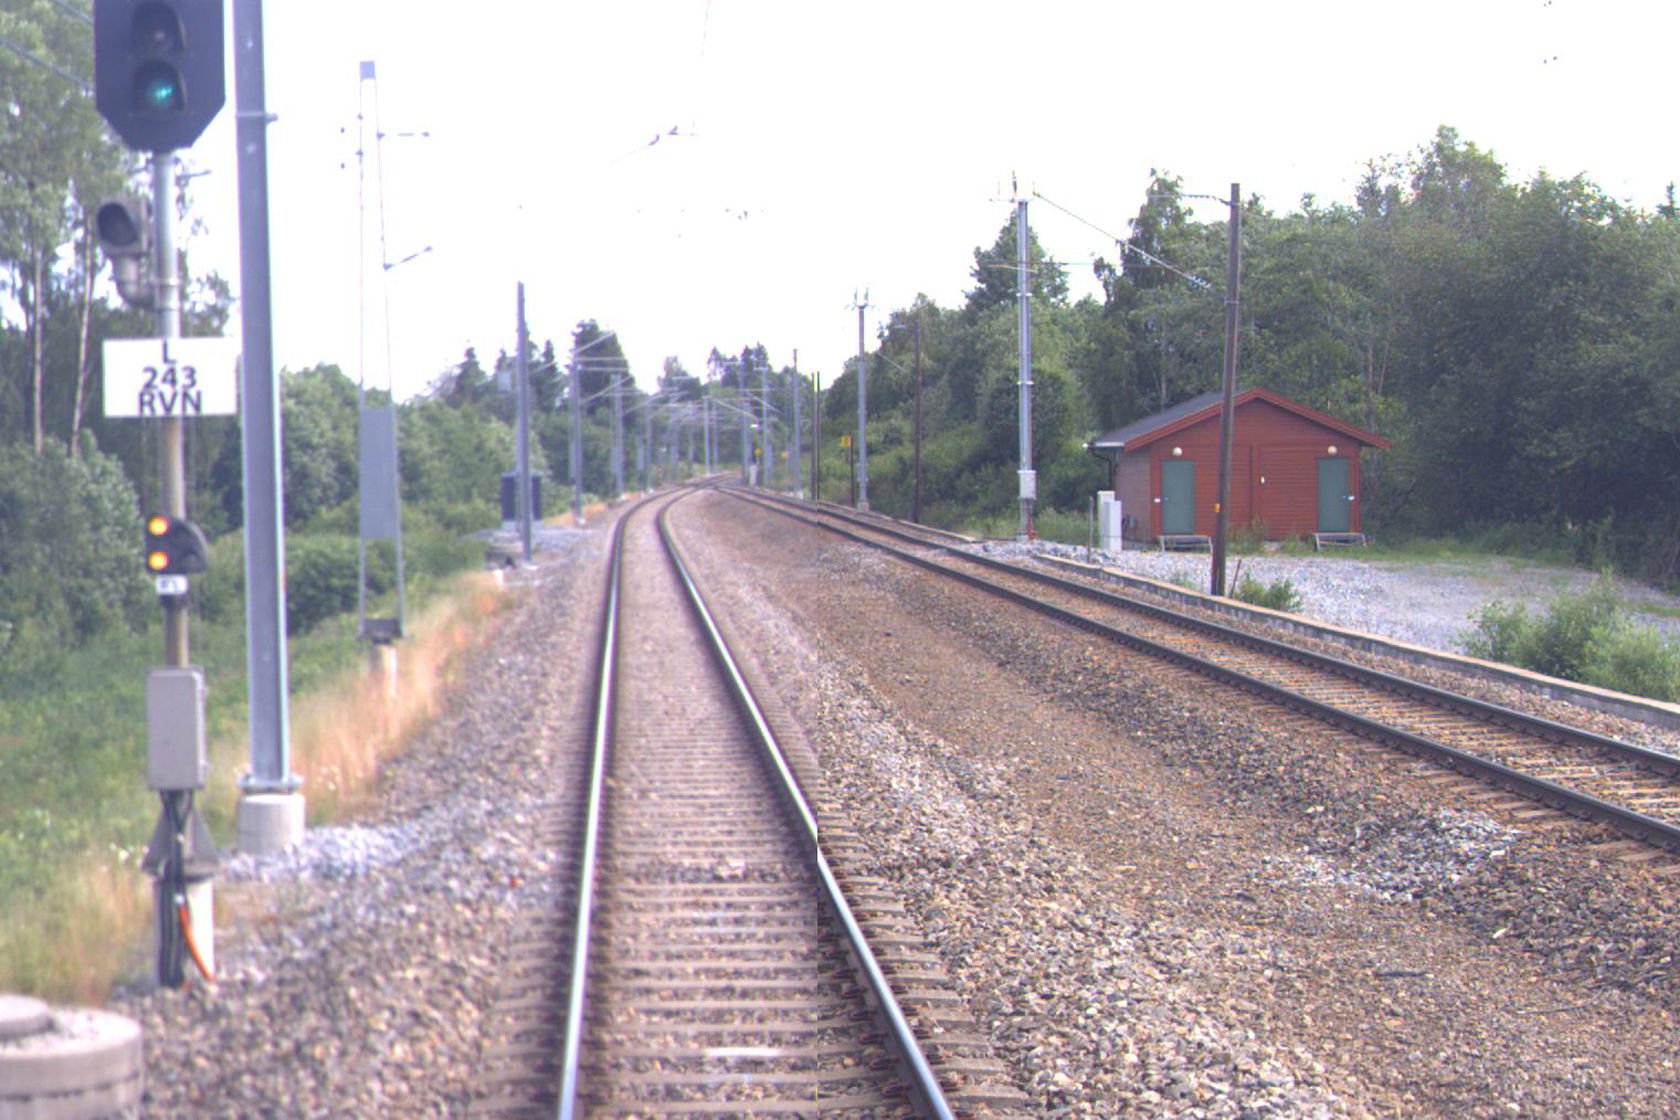 Tracks and building at Roven station